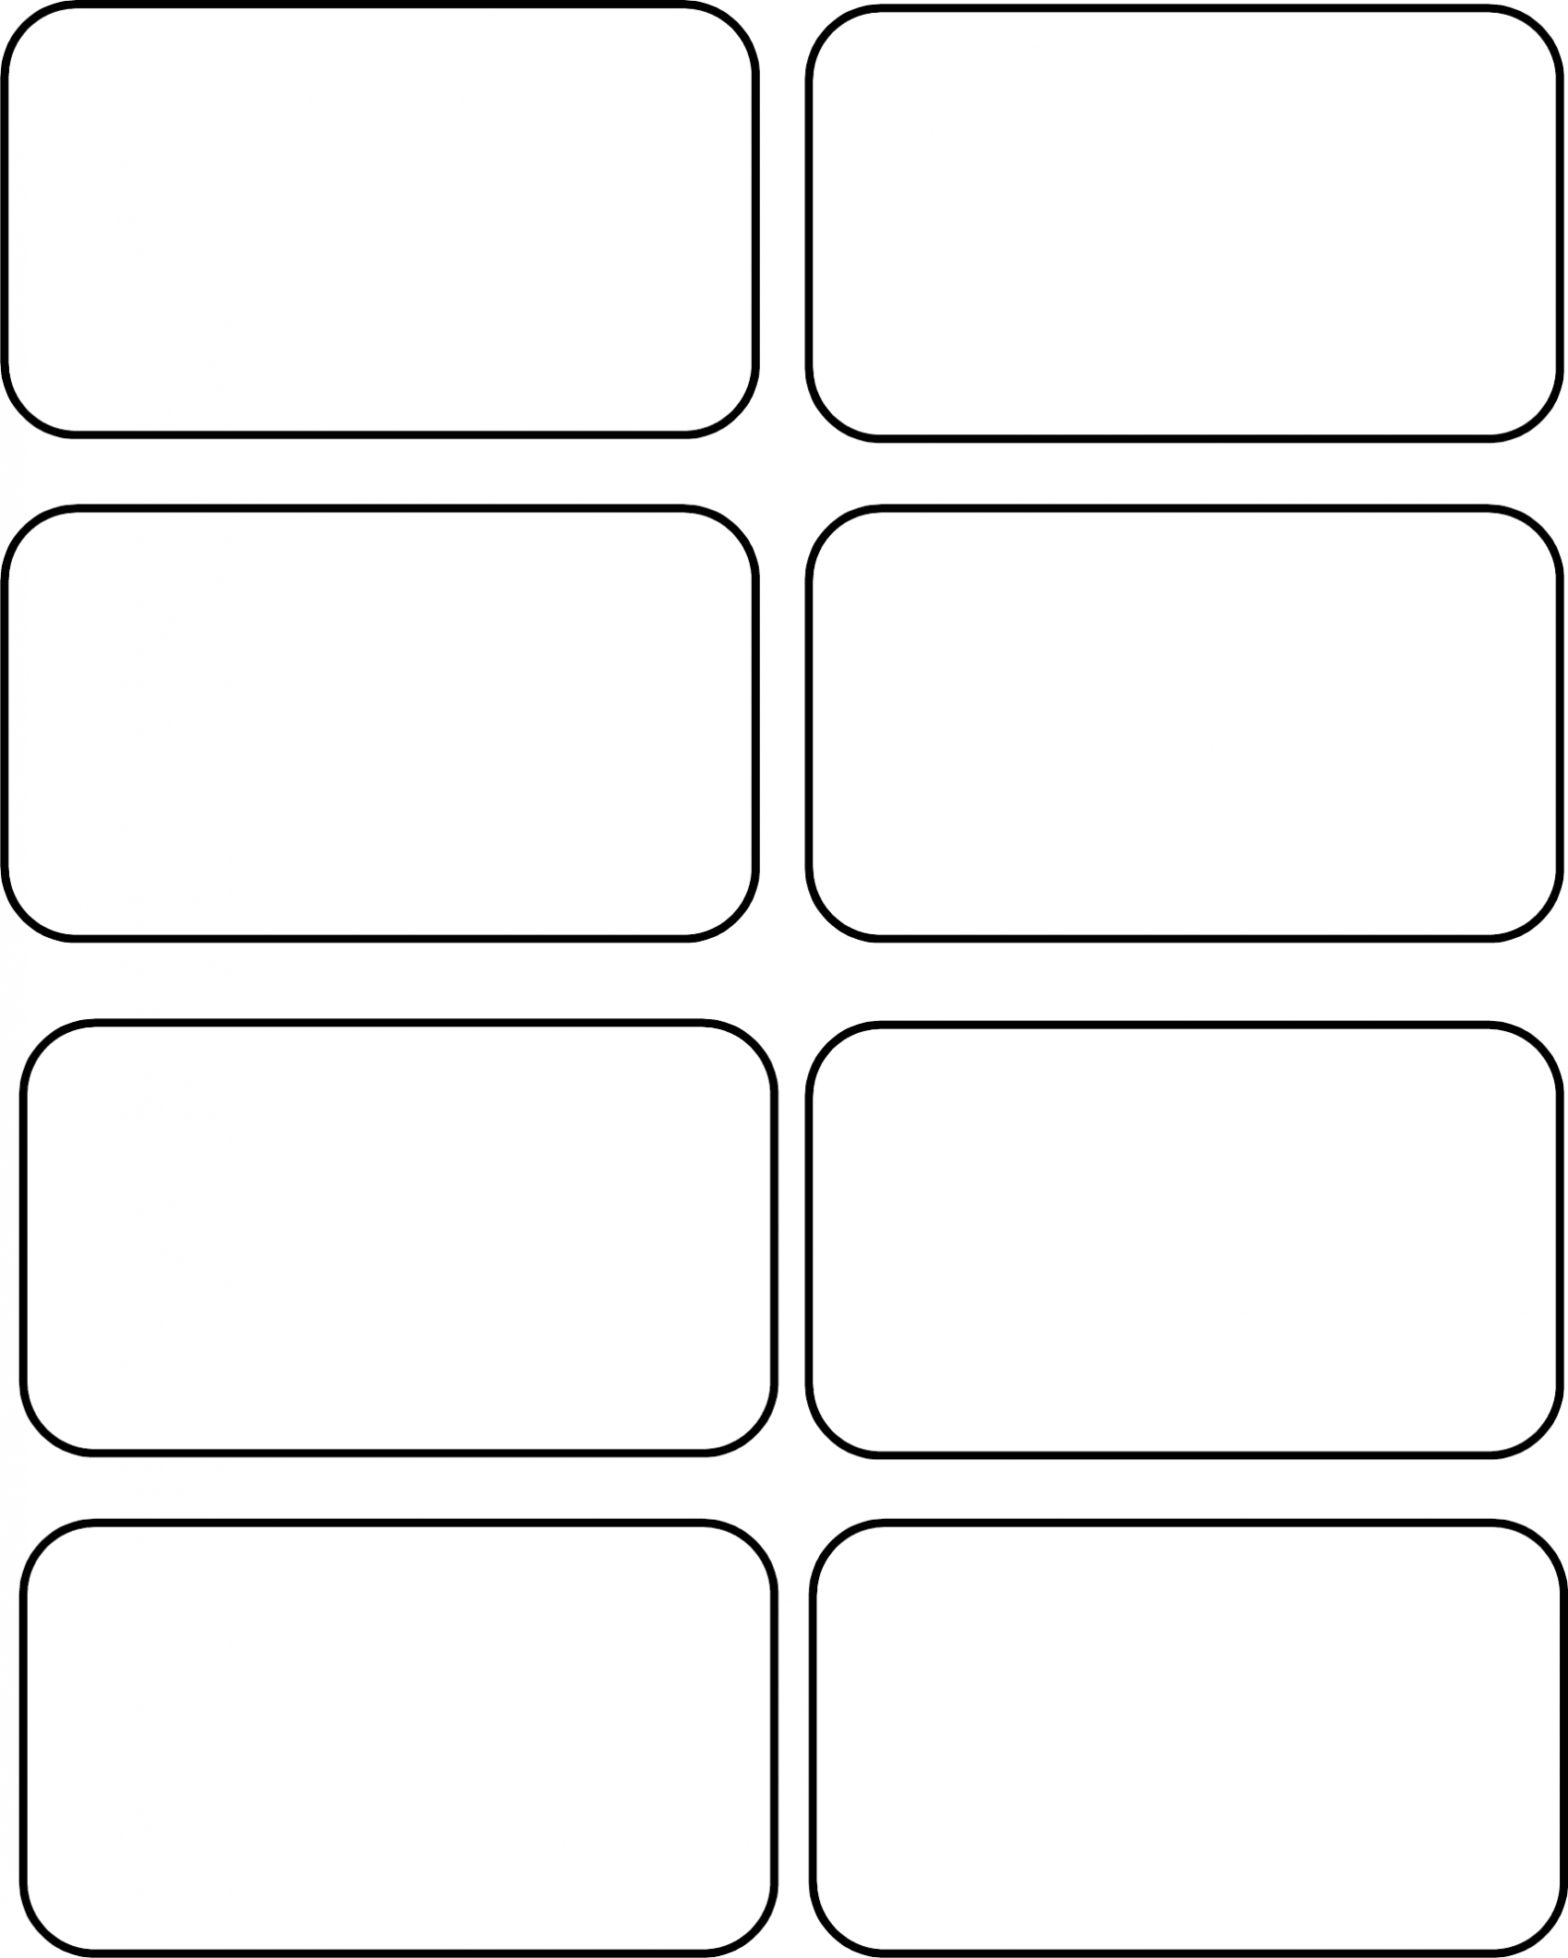 Template Of Luggage Tag Free Download intended for Blank Luggage Tag Template